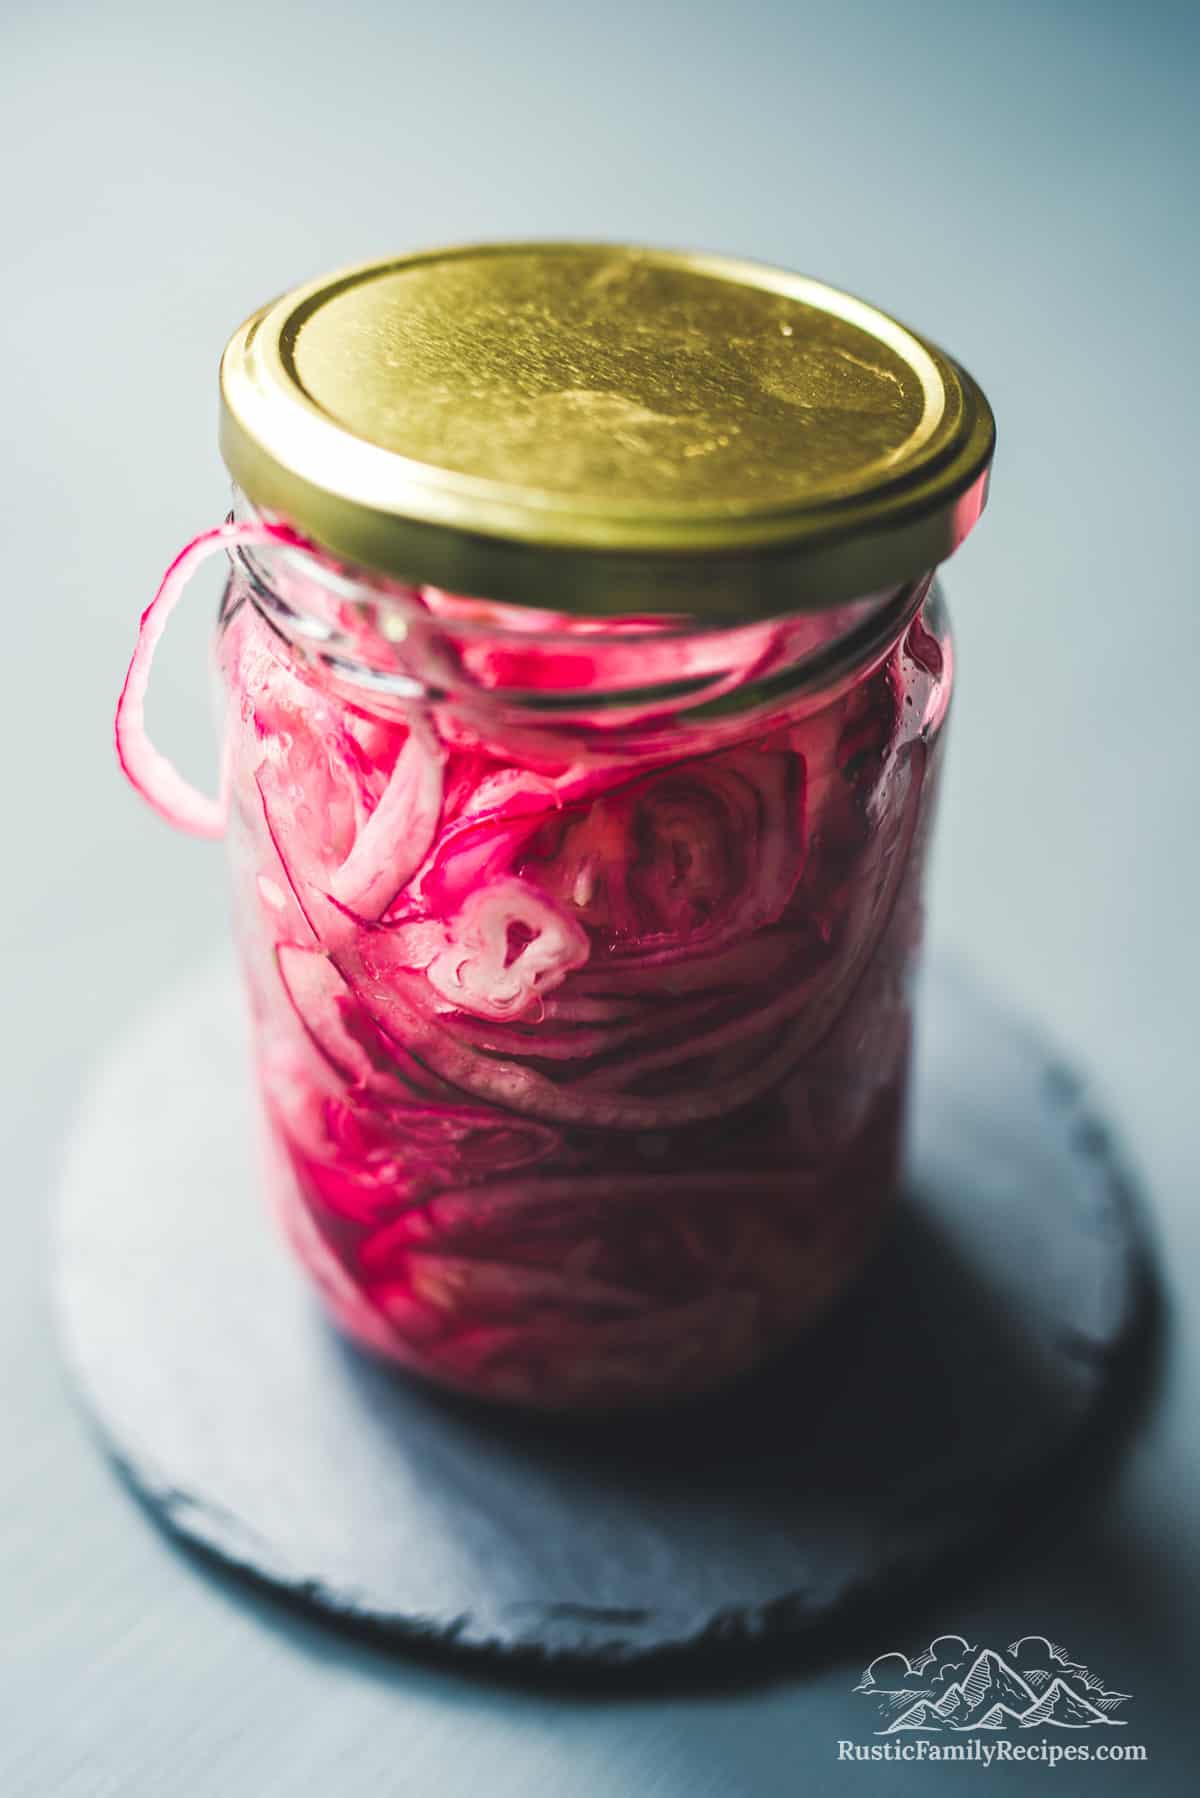 Mason jar with a gold lid filled with pickled red onions